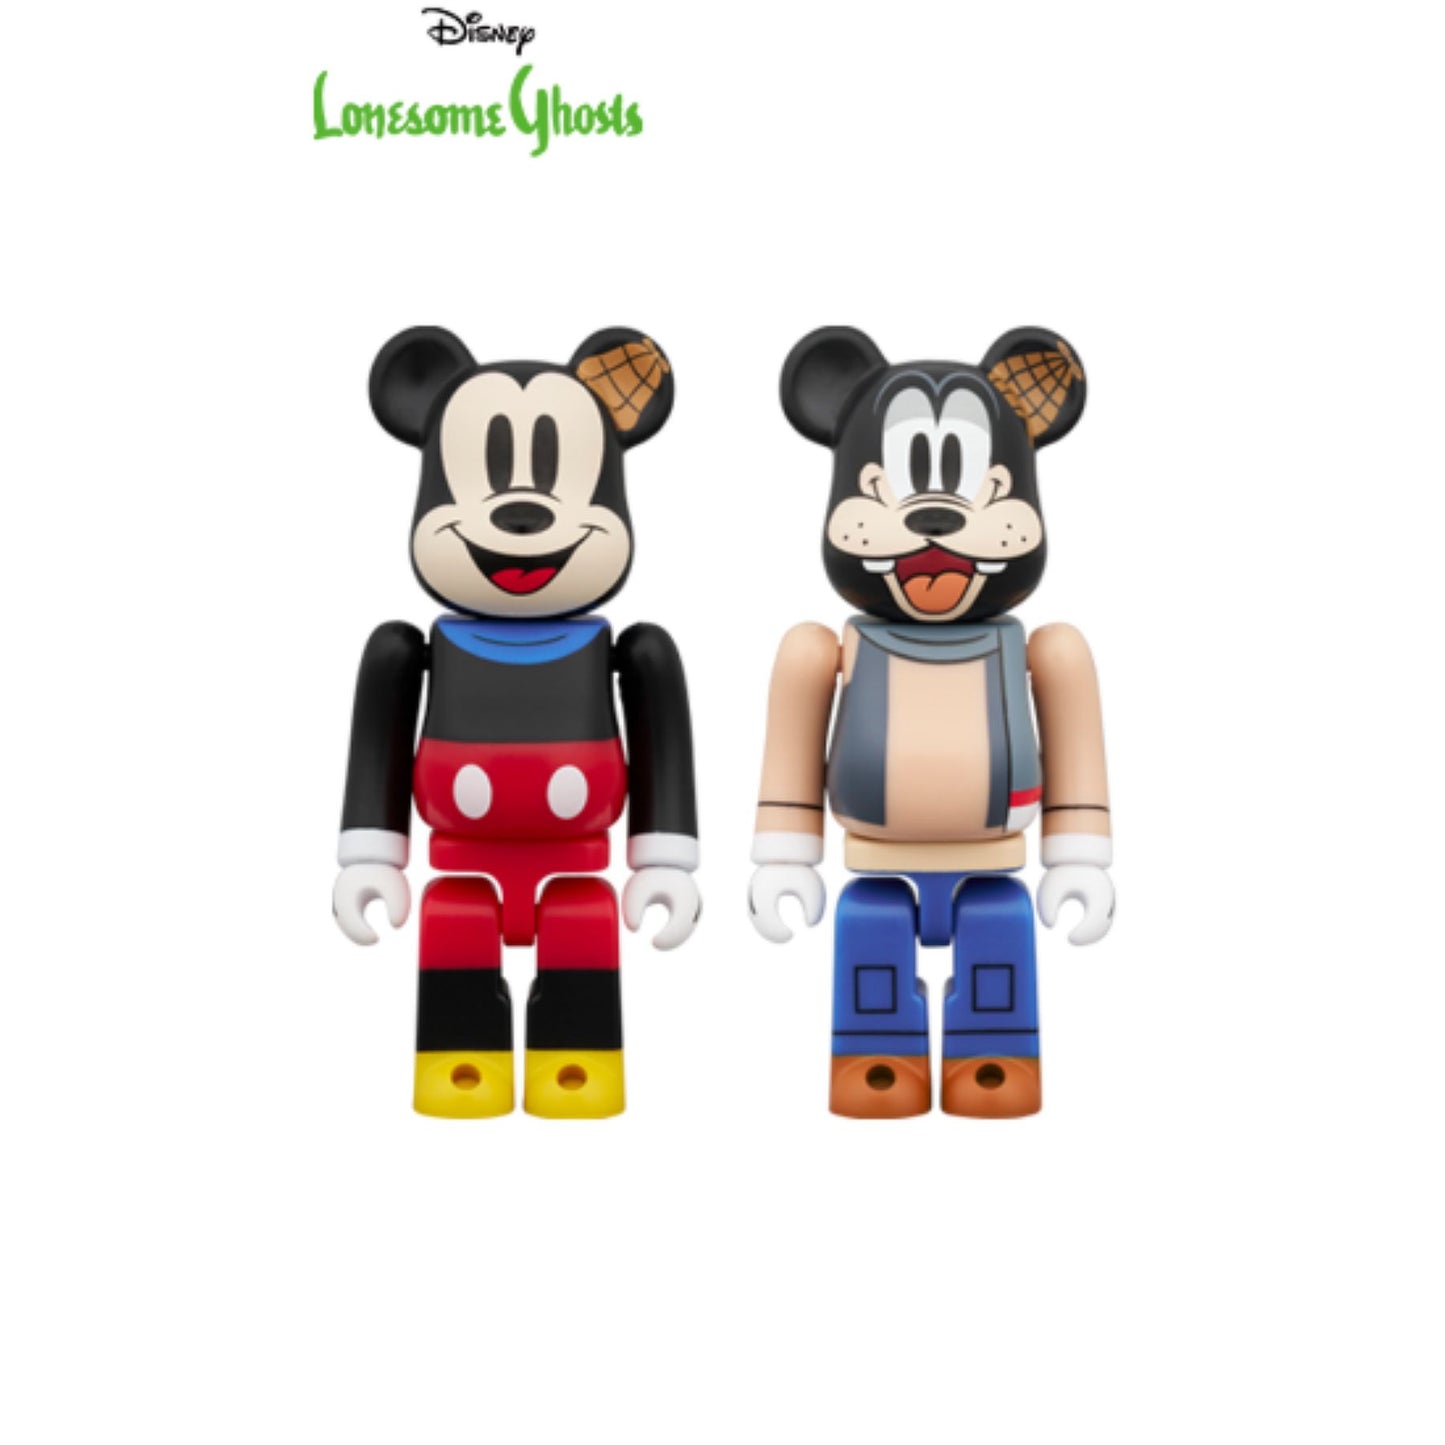 100% BE@RBRICK MICKEY MOUSE & GOOFY (Lonesome Ghosts Ver.) 2PCS SET